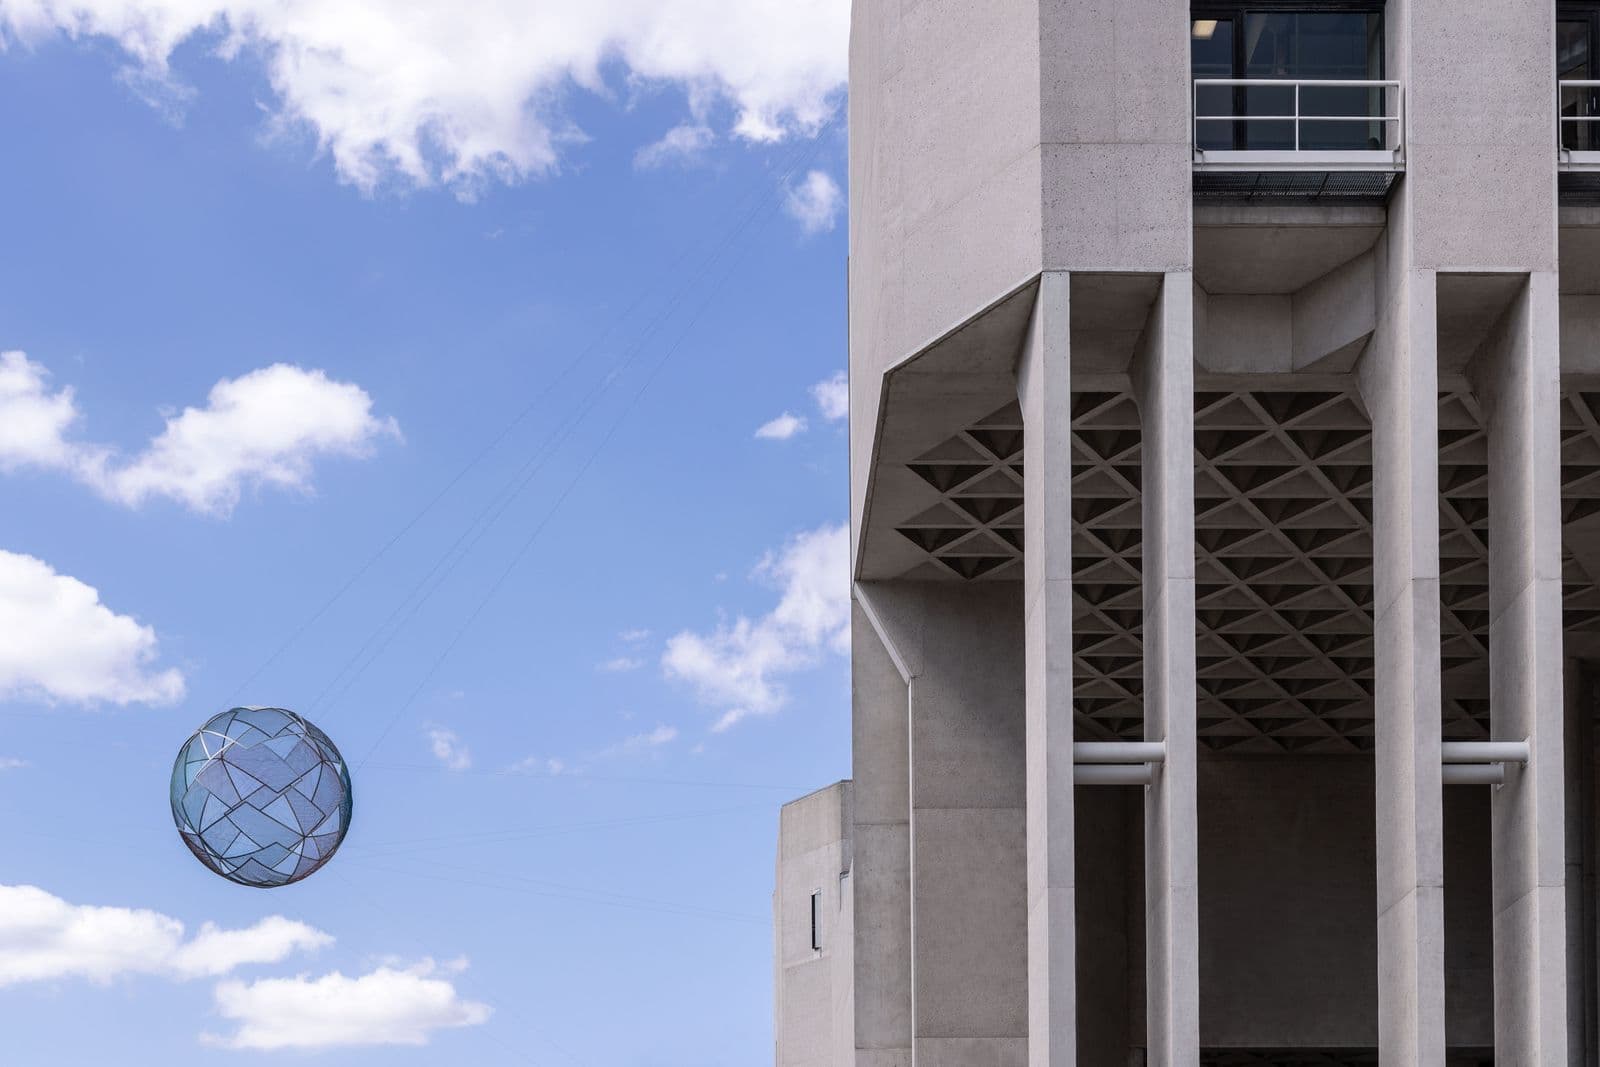 the edge of a large concrete brutalist building against a blue sky with a giant spherical sculpture suspended in the air